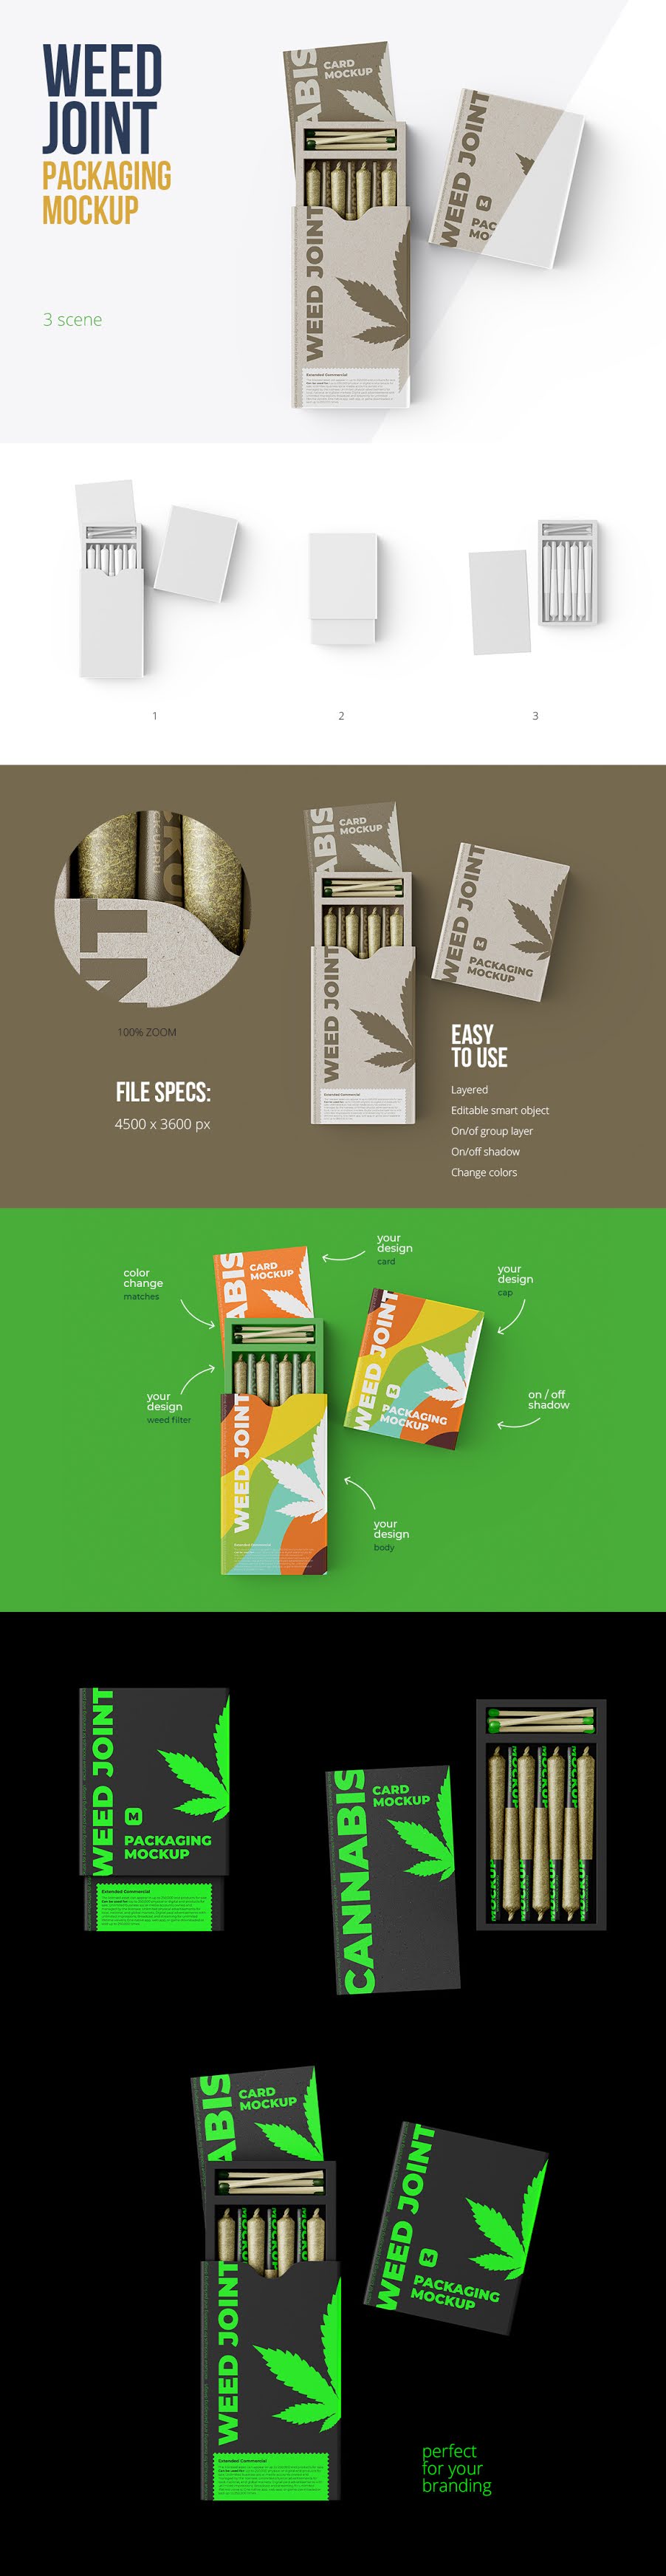 Weed Joint Packaging Mockup 3 psd